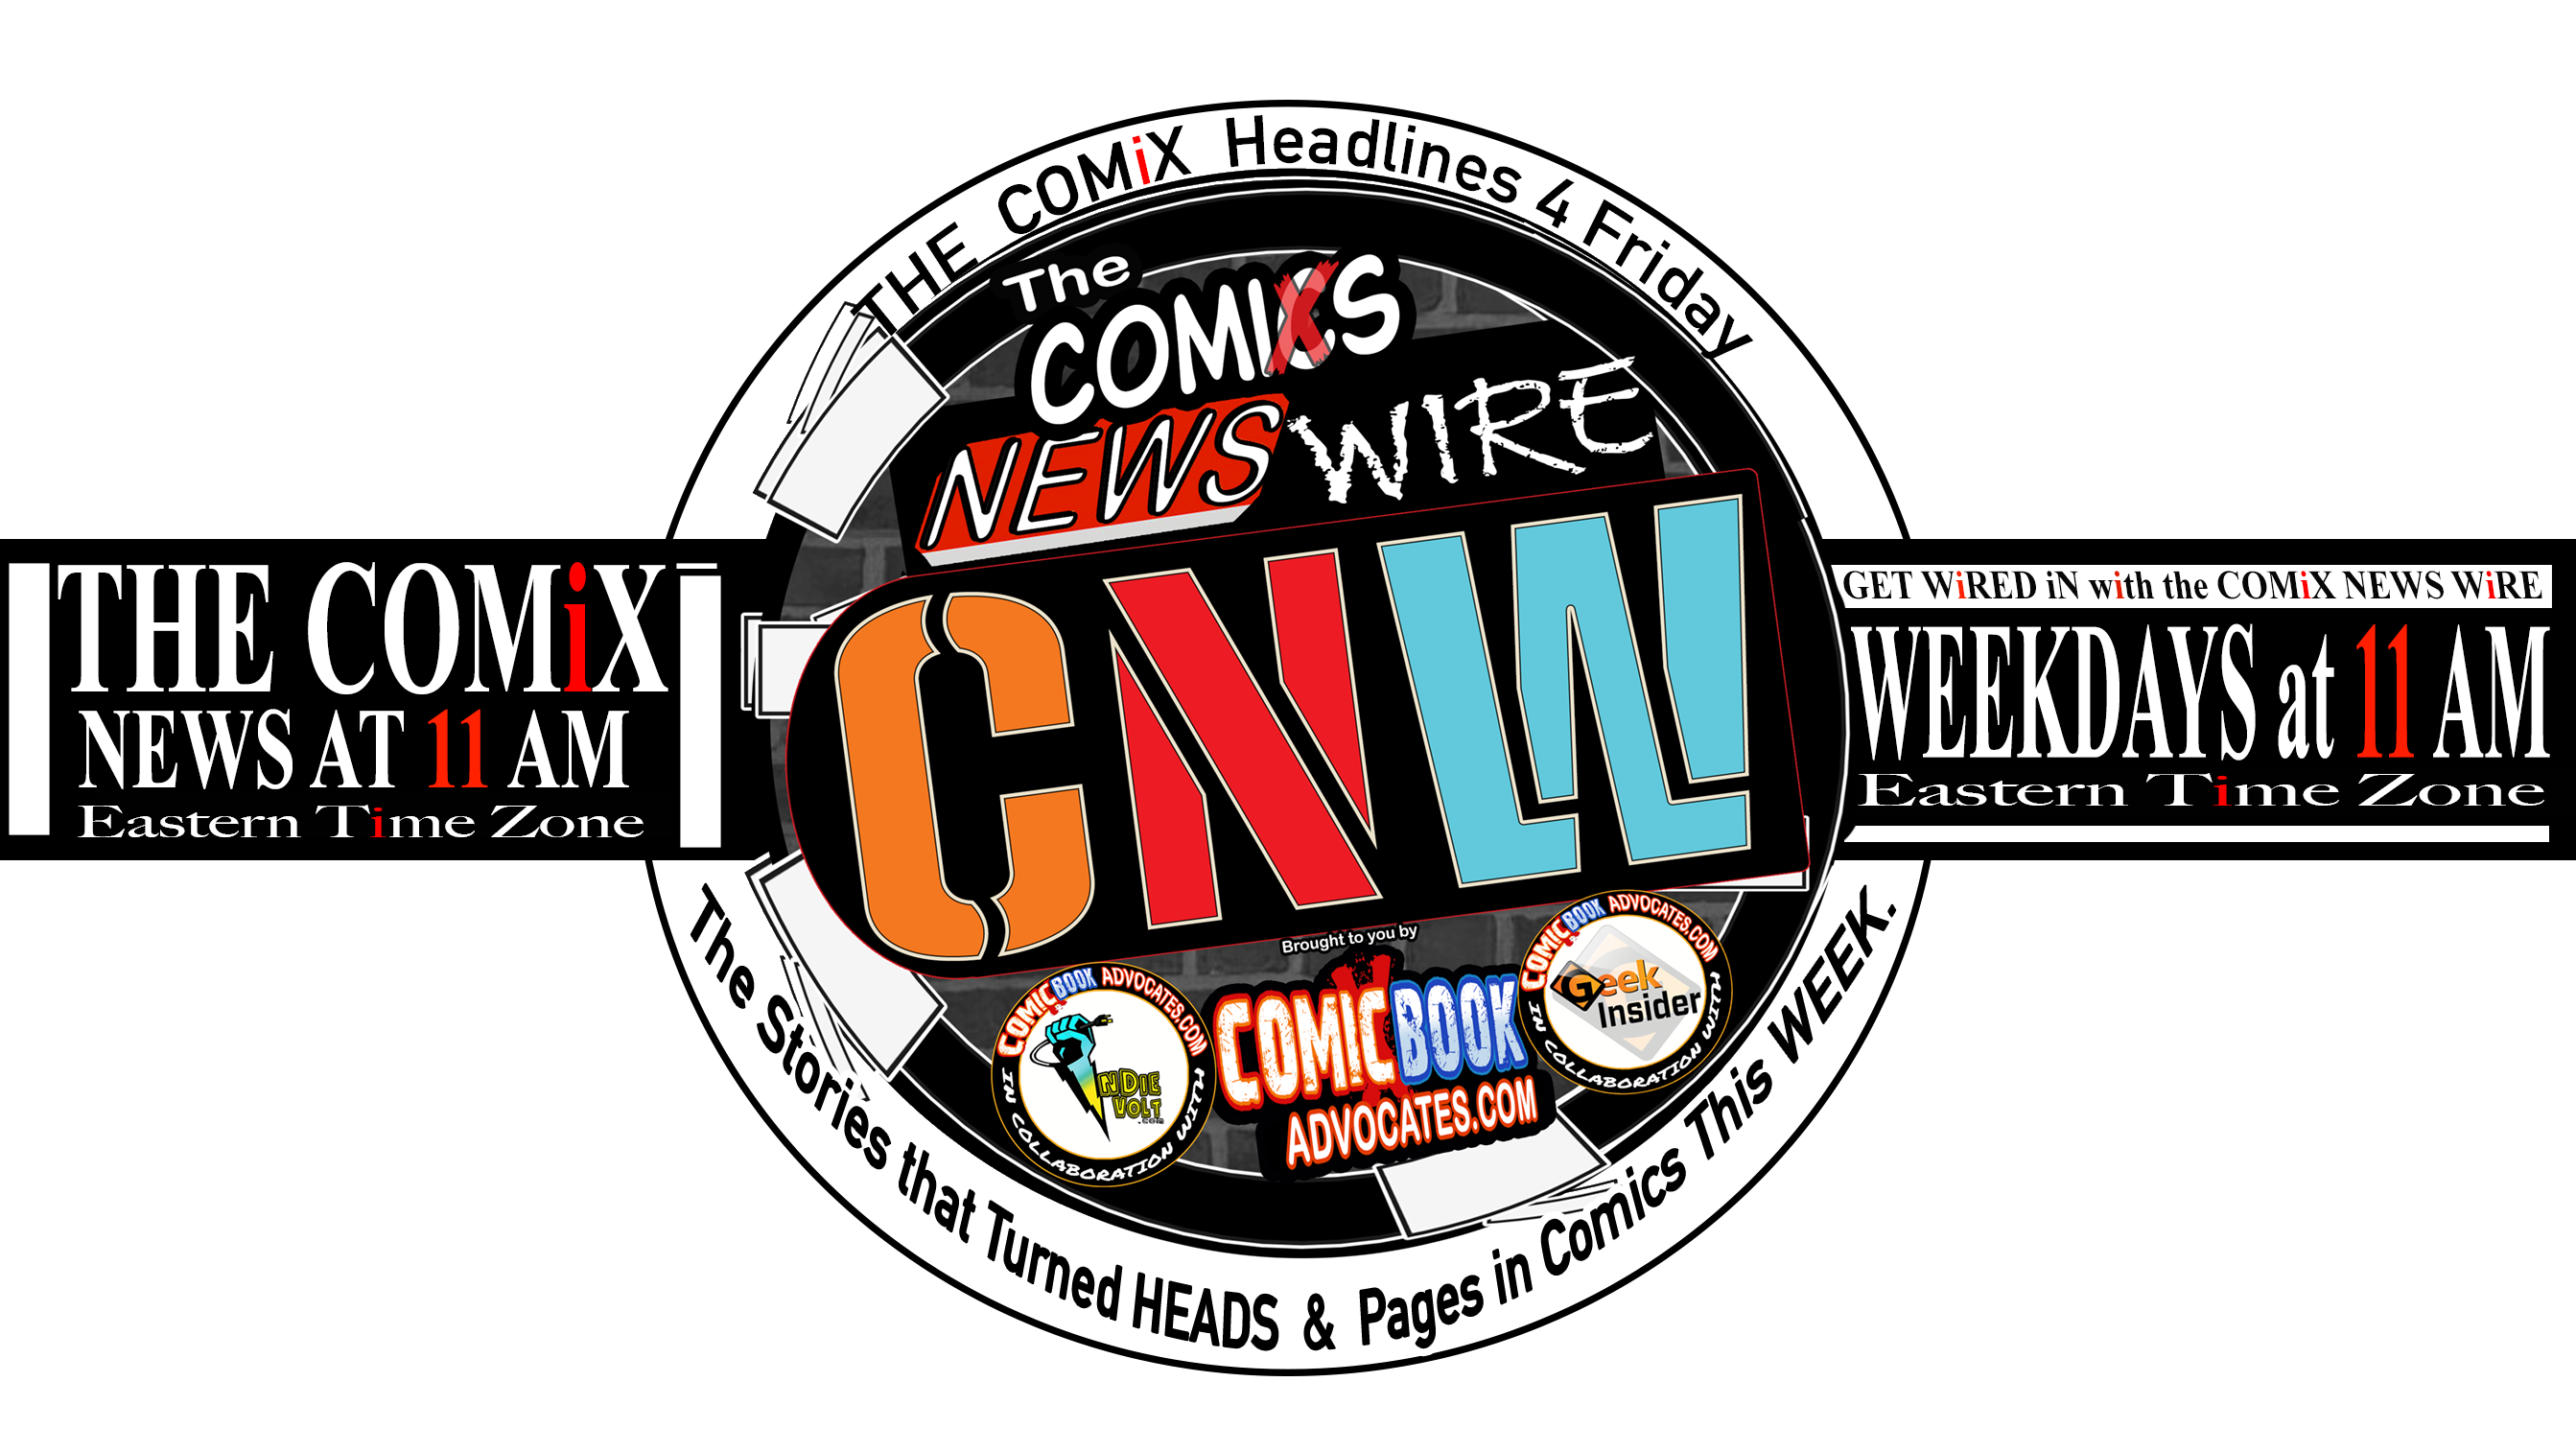 FRIDAY’s RUNDOWN for CNW NEWS AT 11 am ET – Changes to Our Format are coming to create a Better User Experience 10.23.20